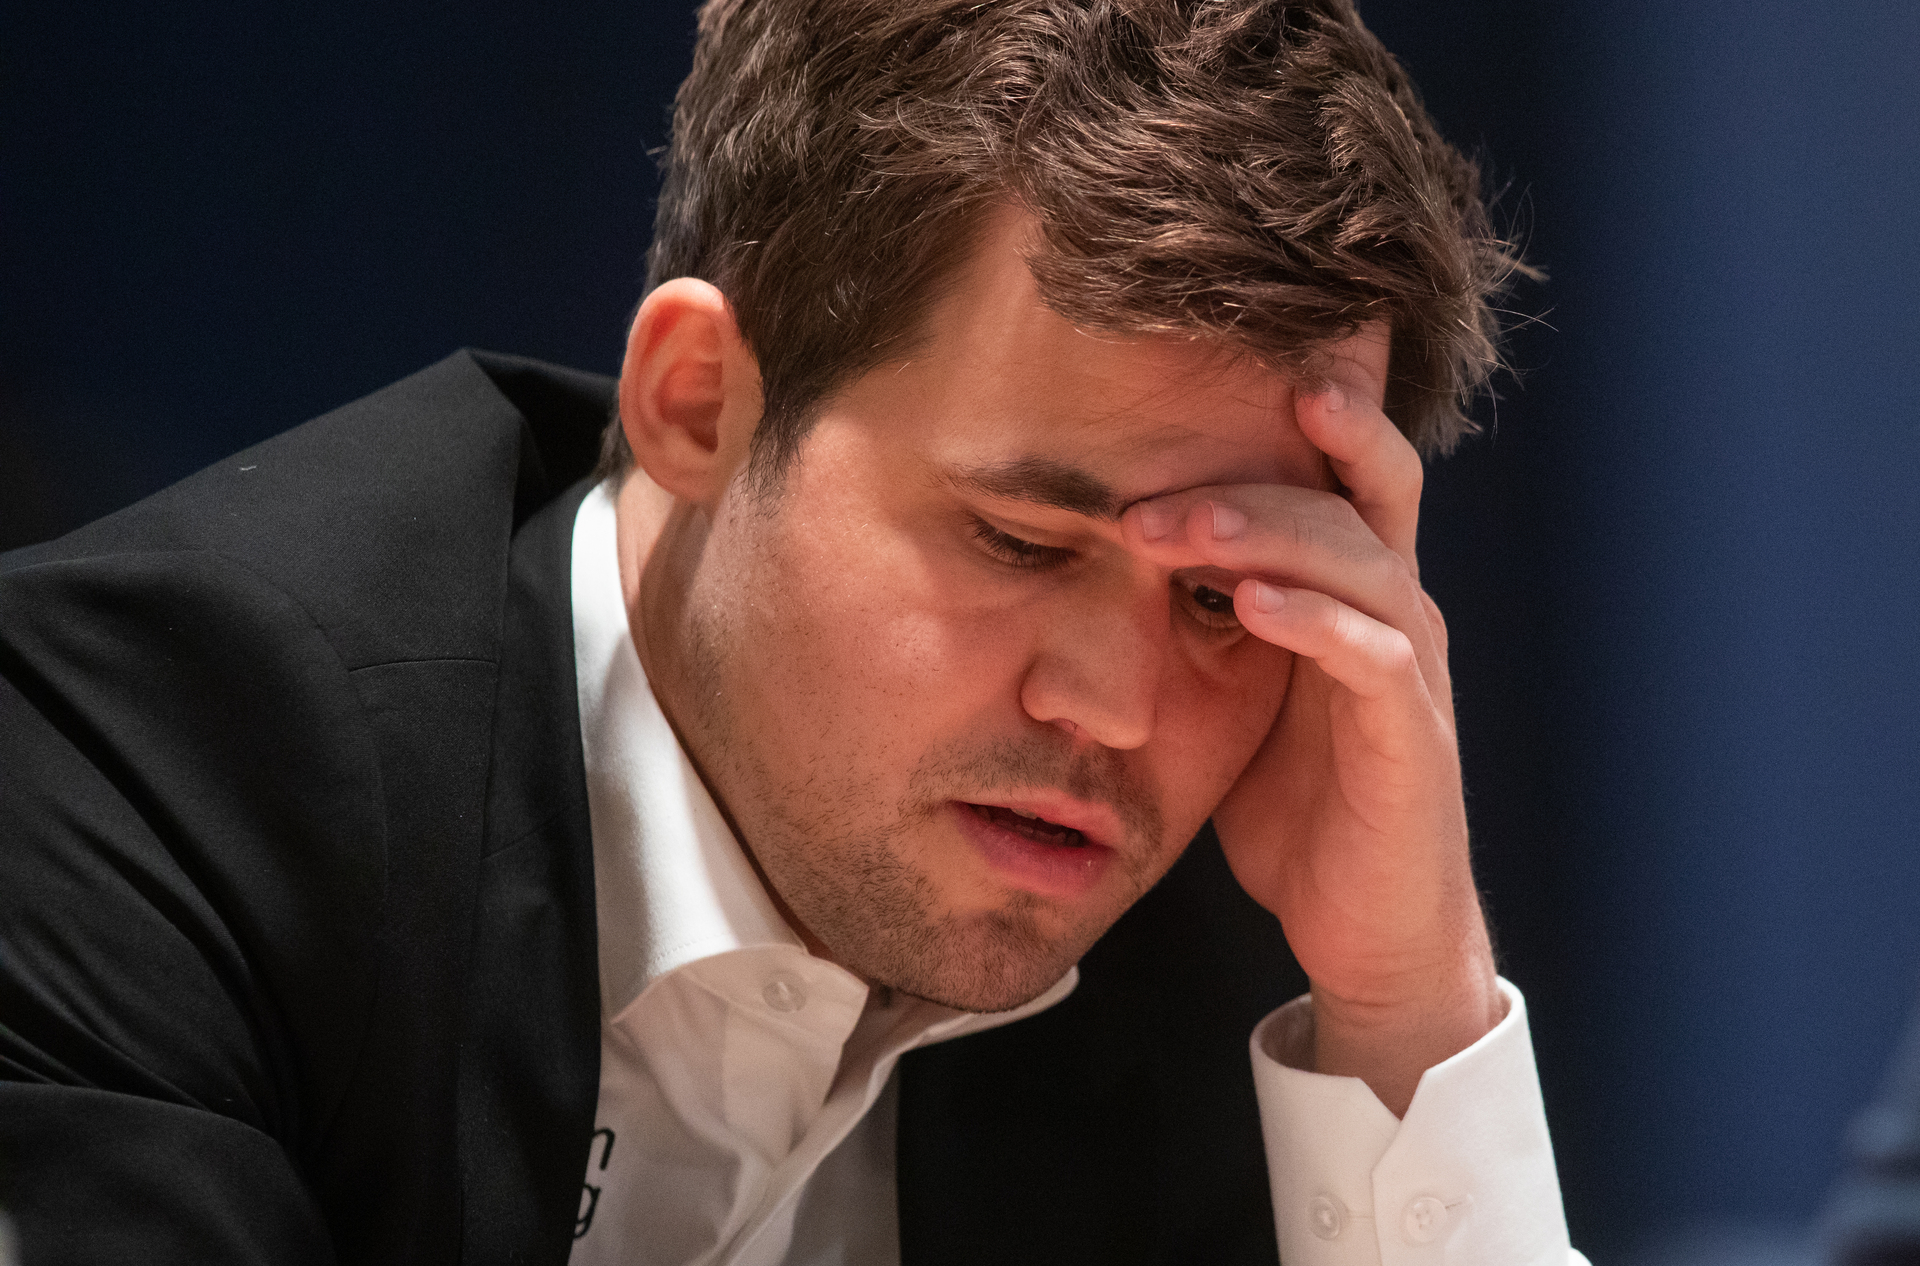 Fide rebukes Carlsen for resignation but 'shares concerns' over cheating in  chess, Magnus Carlsen